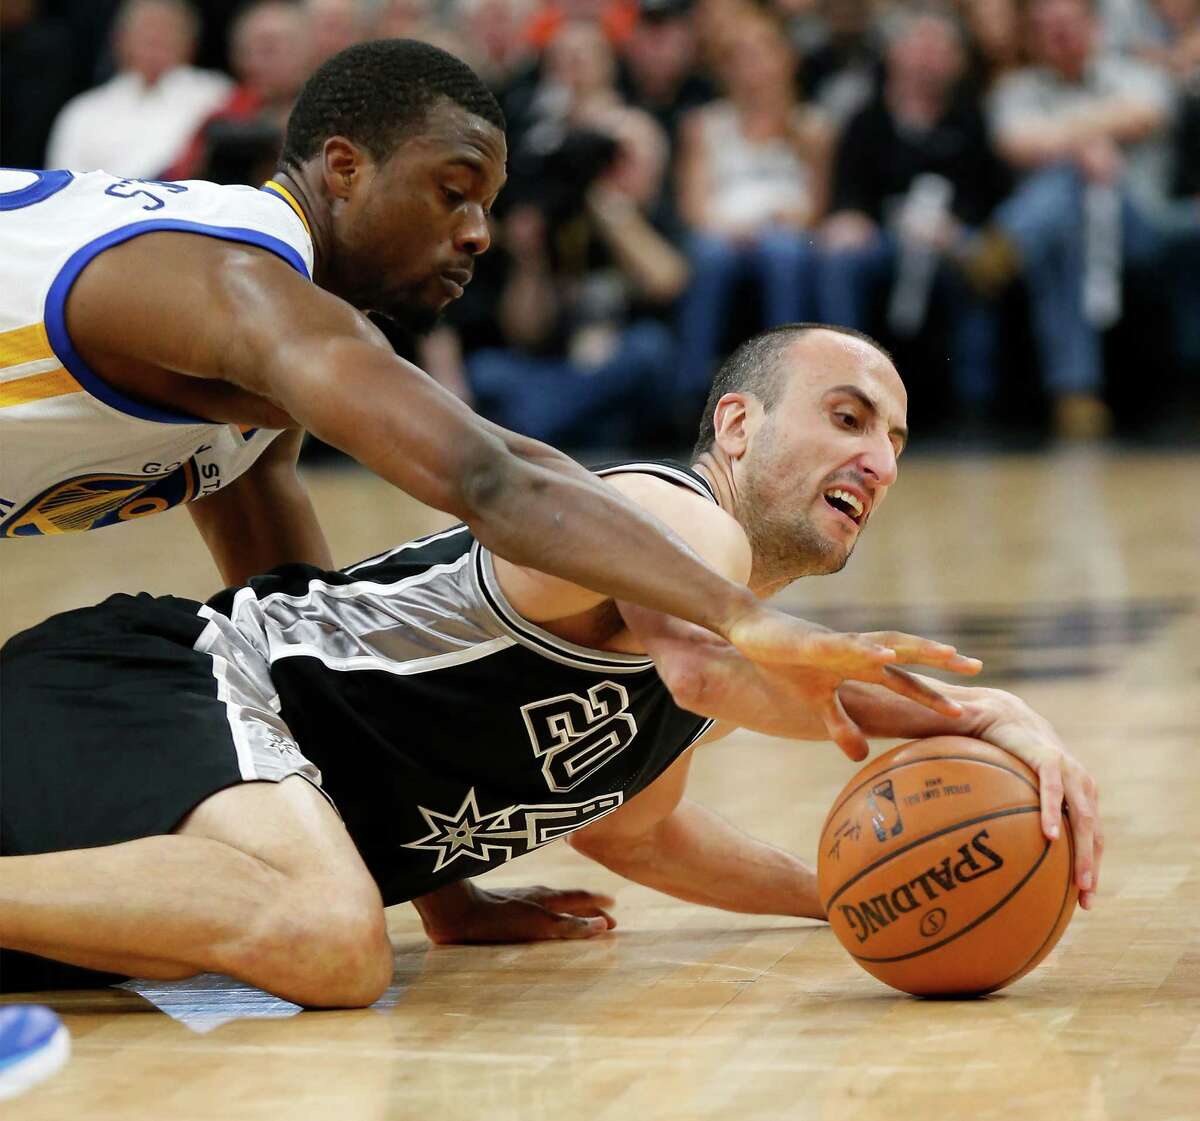 Spurs' Manu Ginobili (20) struggles to keep possession of loose ball against Golden State Warriors' Harrison Barnes (40) at the AT&T Center on Sunday, Apr. 10, 2016.